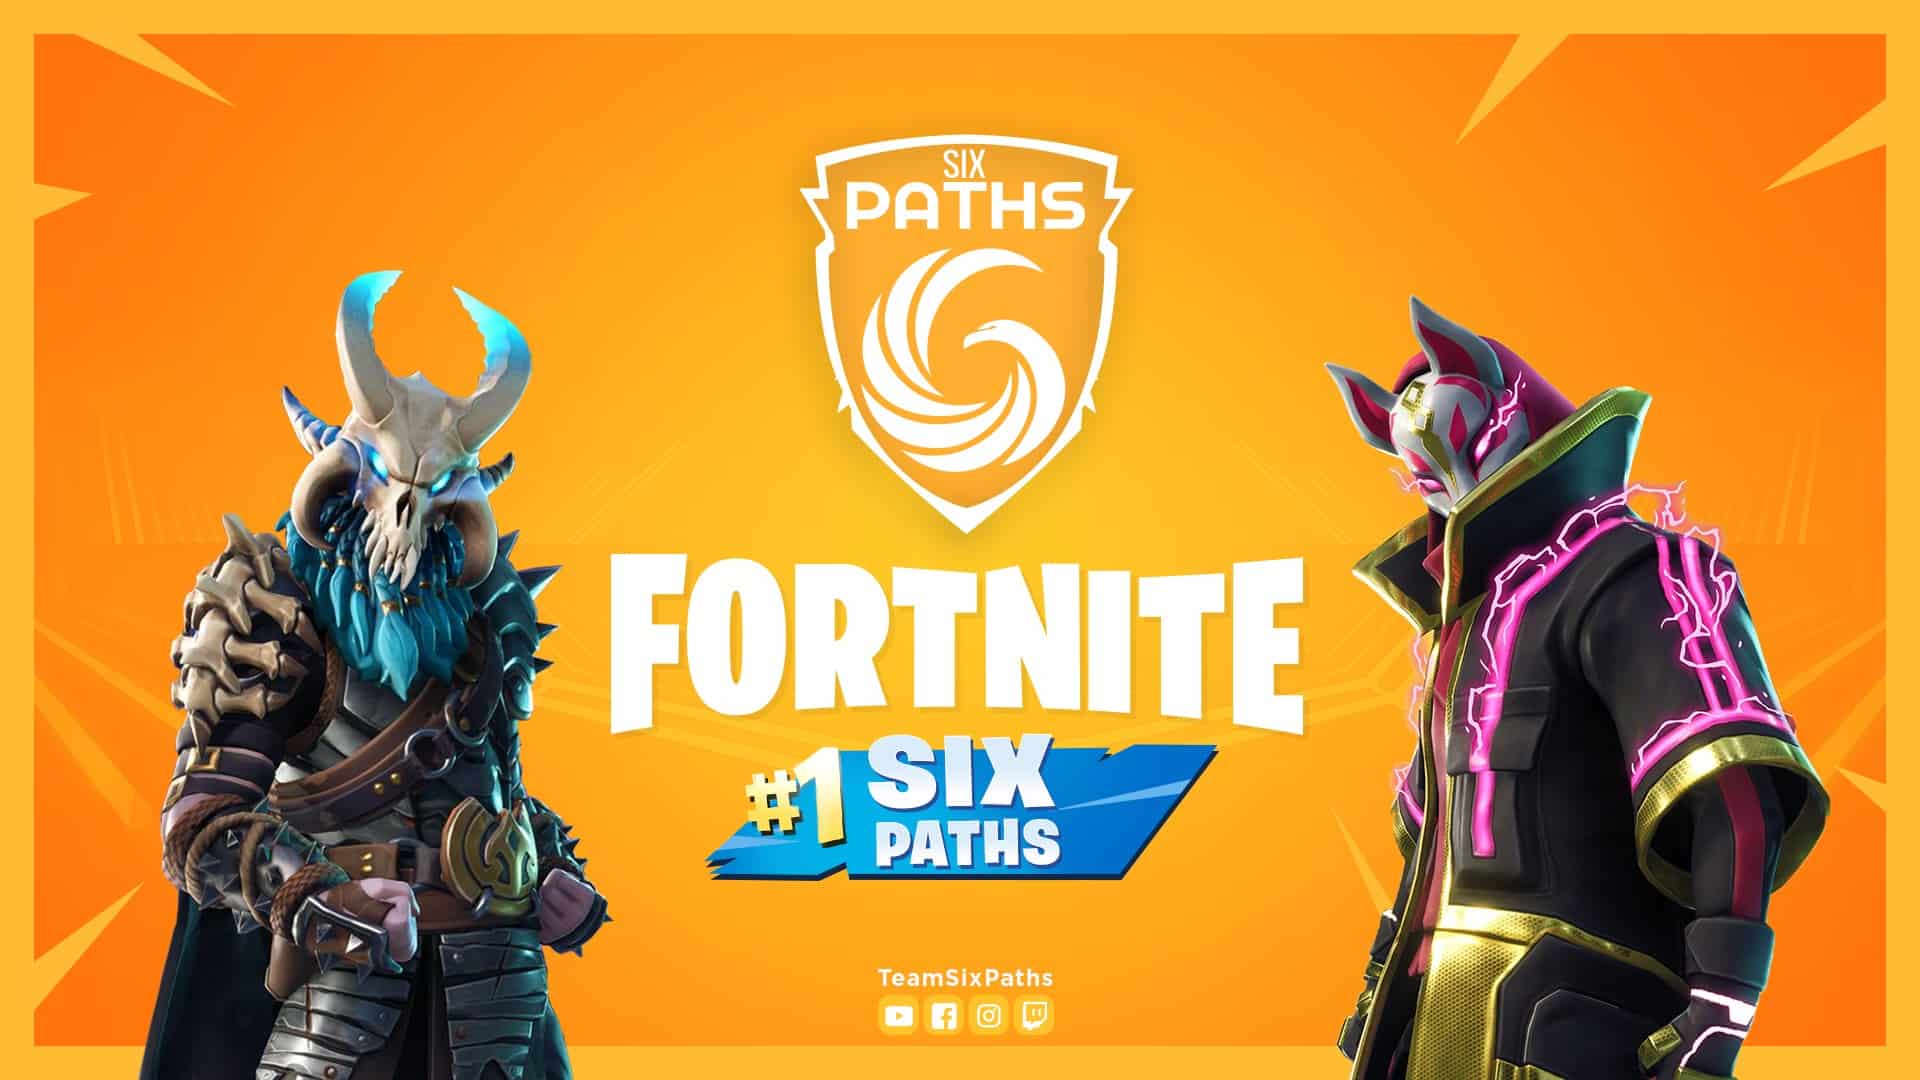 Team Six Paths expansion into fortnite